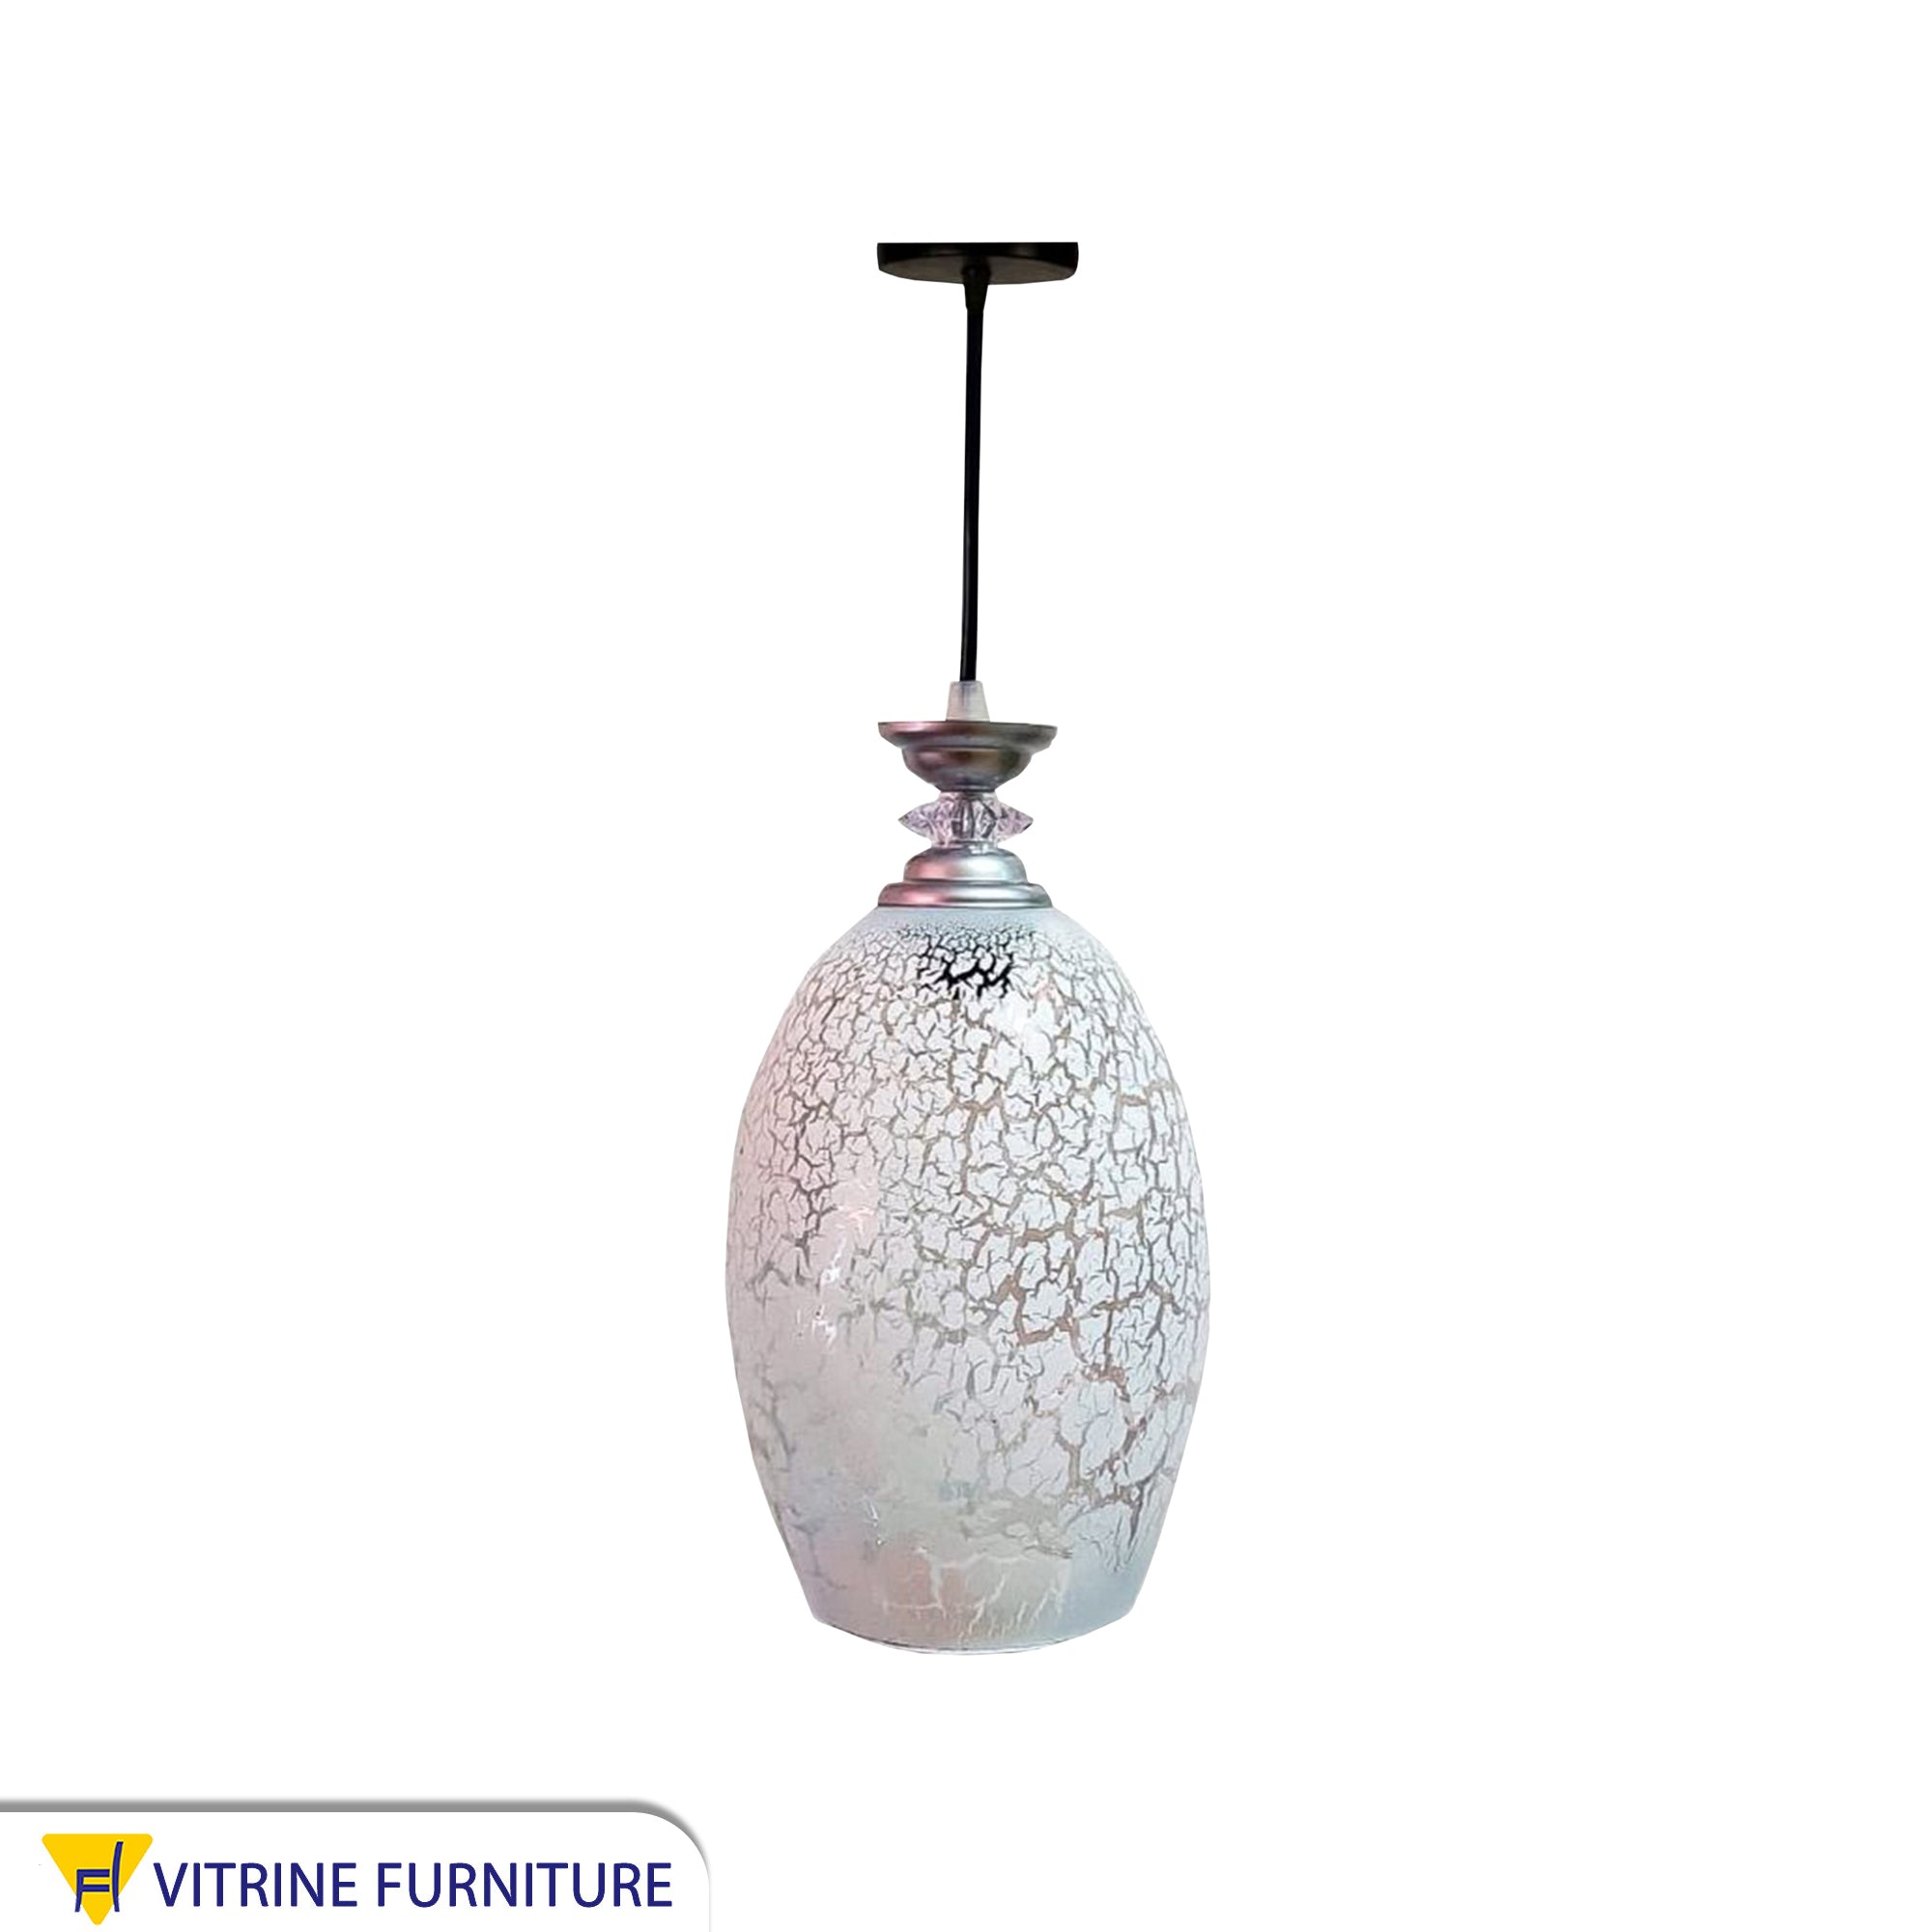 A pendant with a decorated cylindrical glass